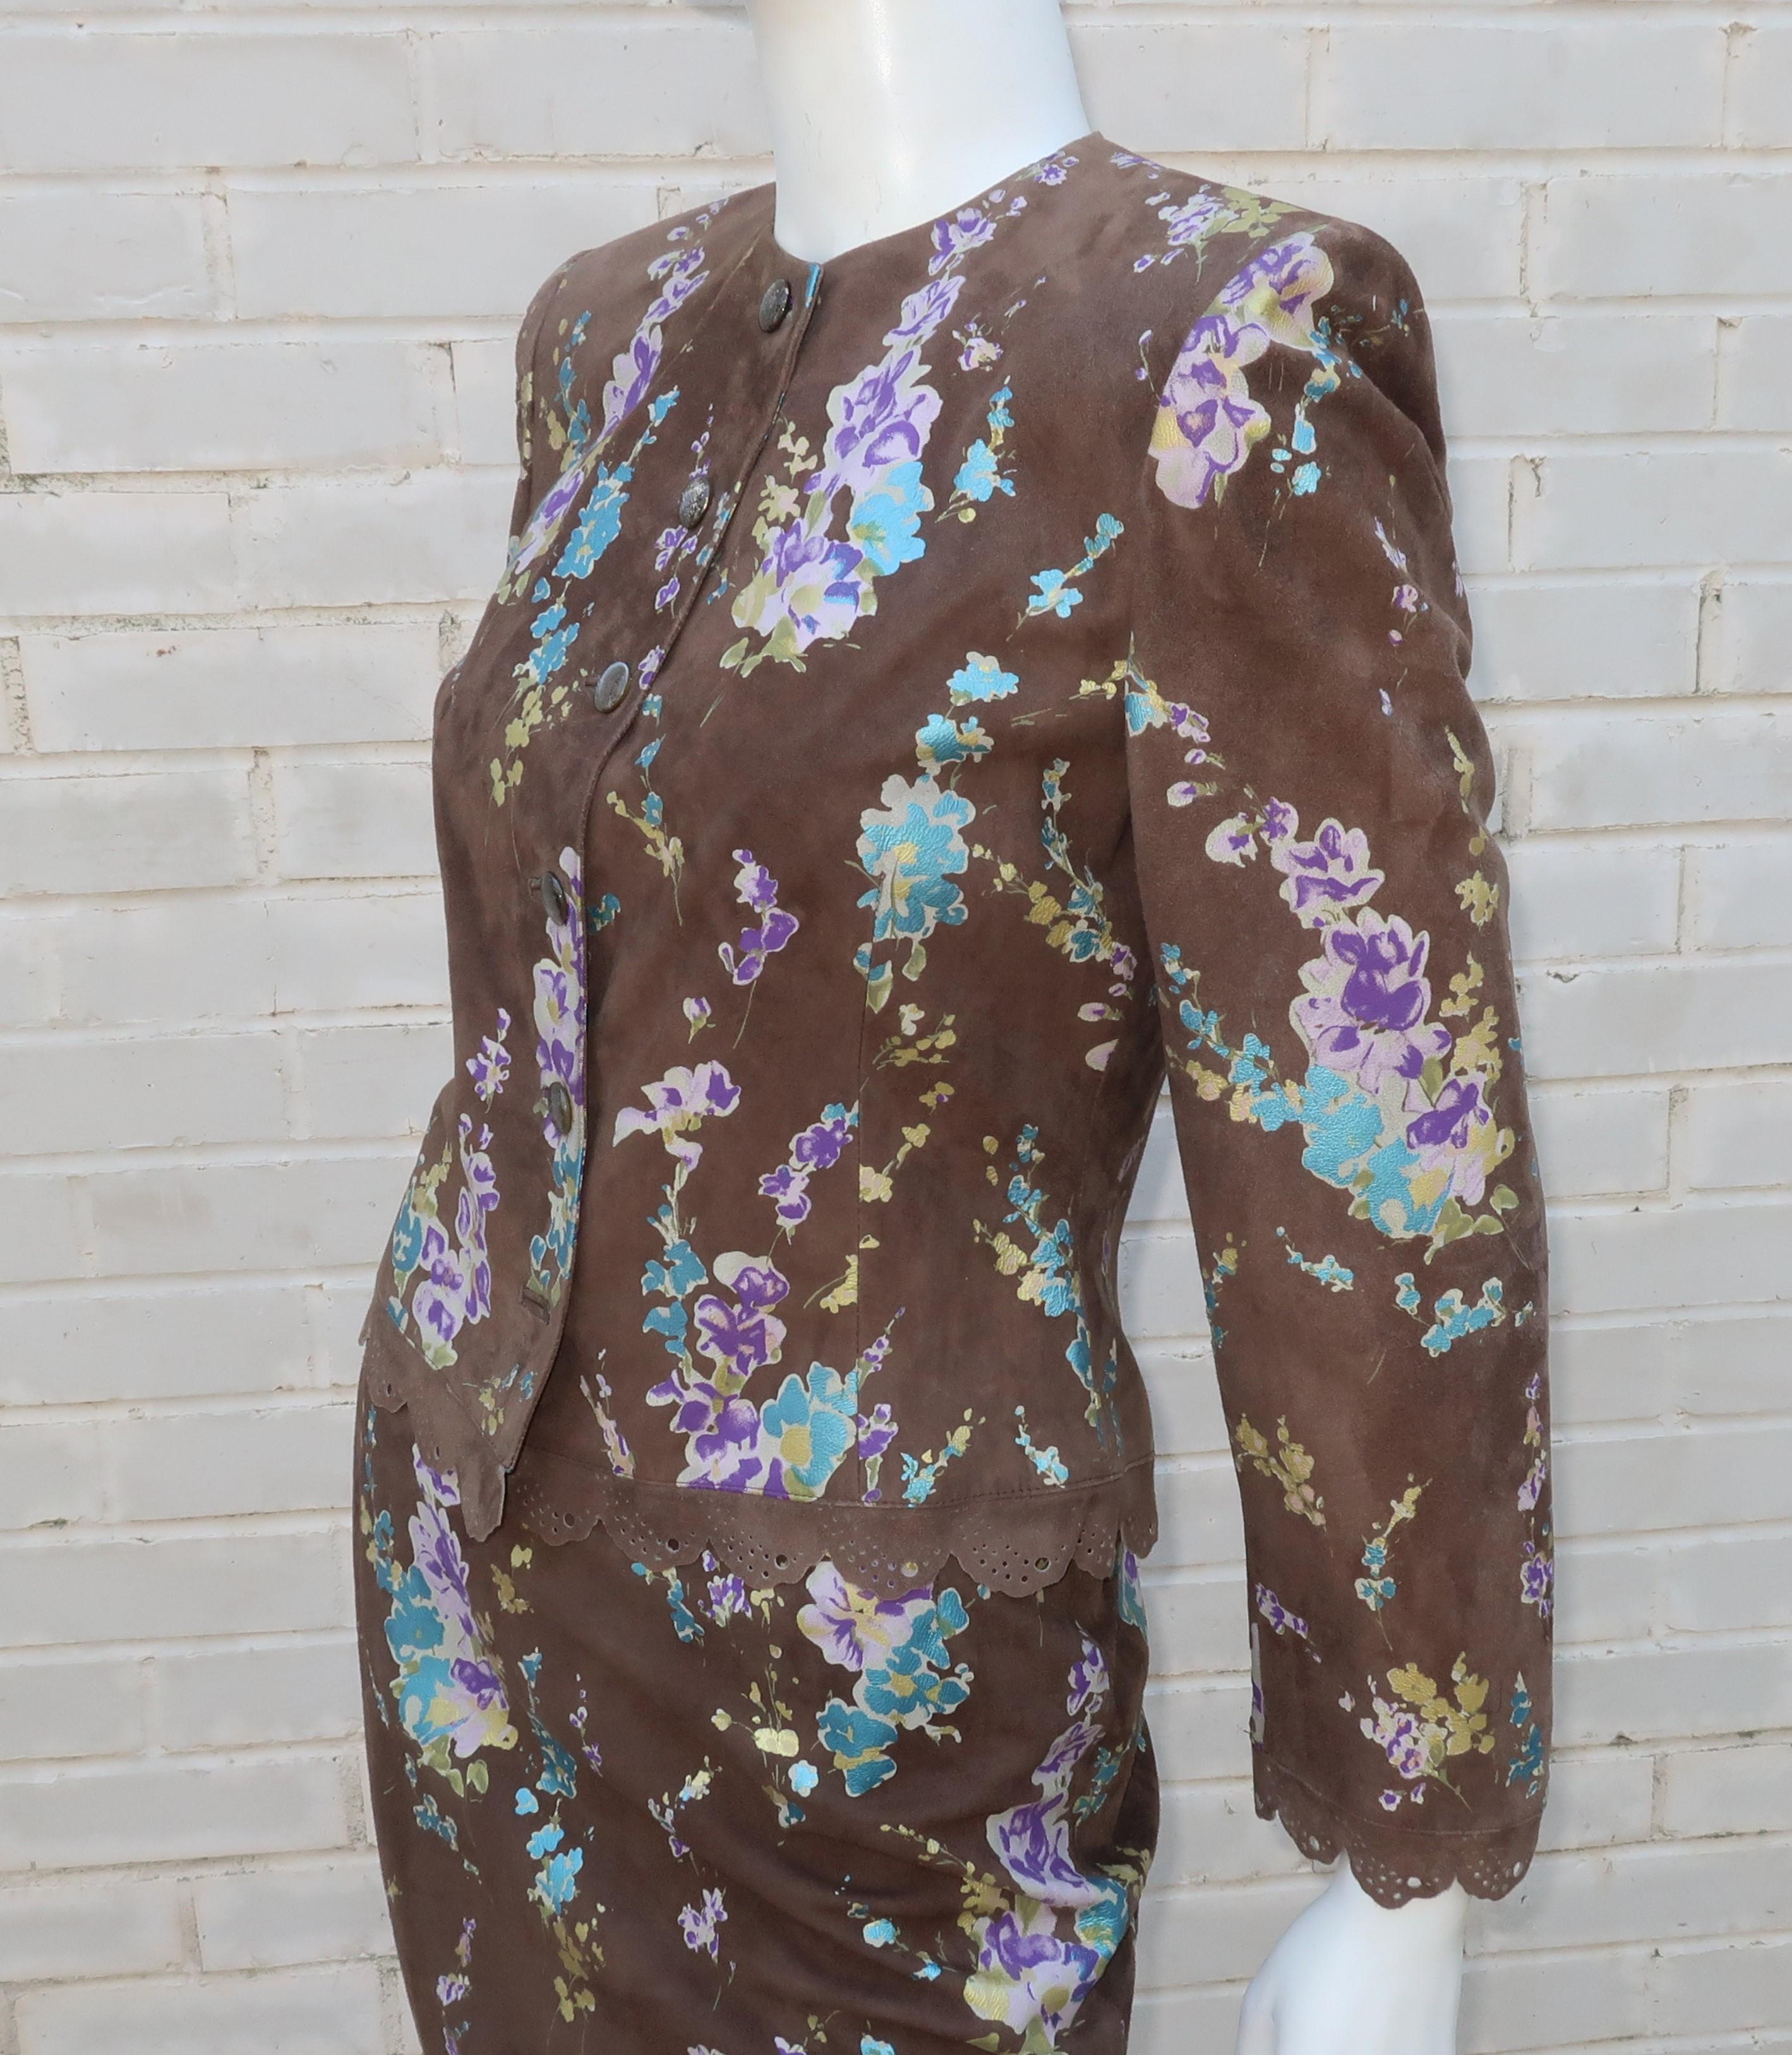 A unique Emanuel Ungaro 1980's skirt suit design in a supple brown suede with a floral transfer pattern in shades of matte gold, metallic blue and purple.  The collarless jacket buttons up the front with pierced scallop details at the cuffs and hem.